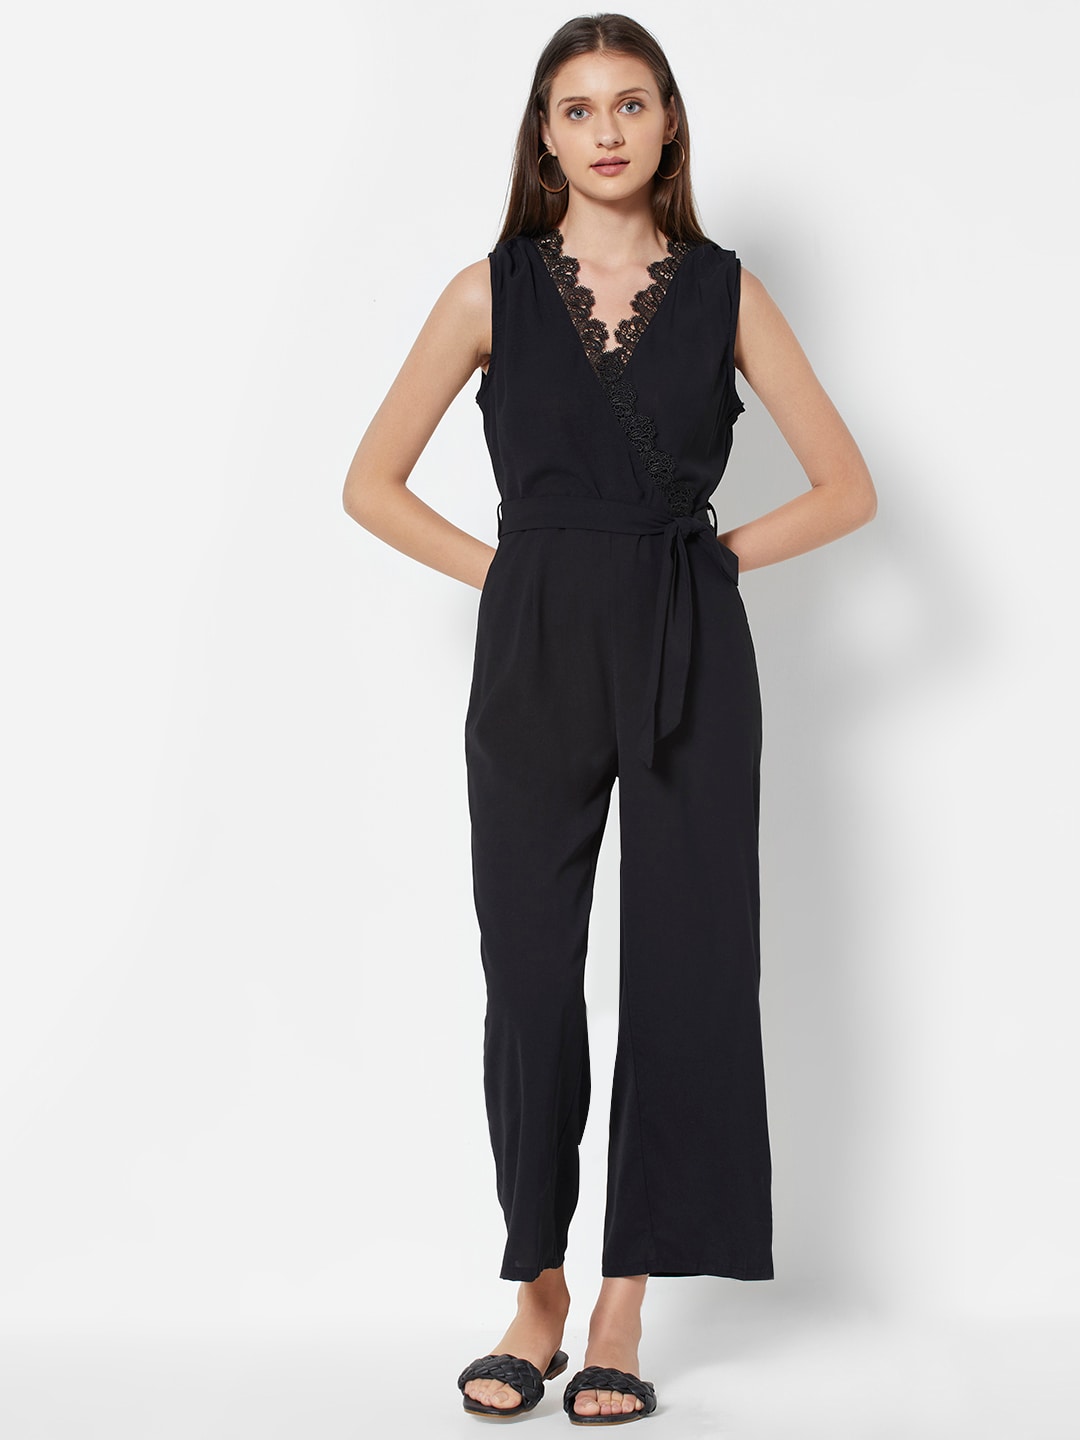 URBANIC Black Solid Basic Jumpsuit with Lace Inserts Price in India